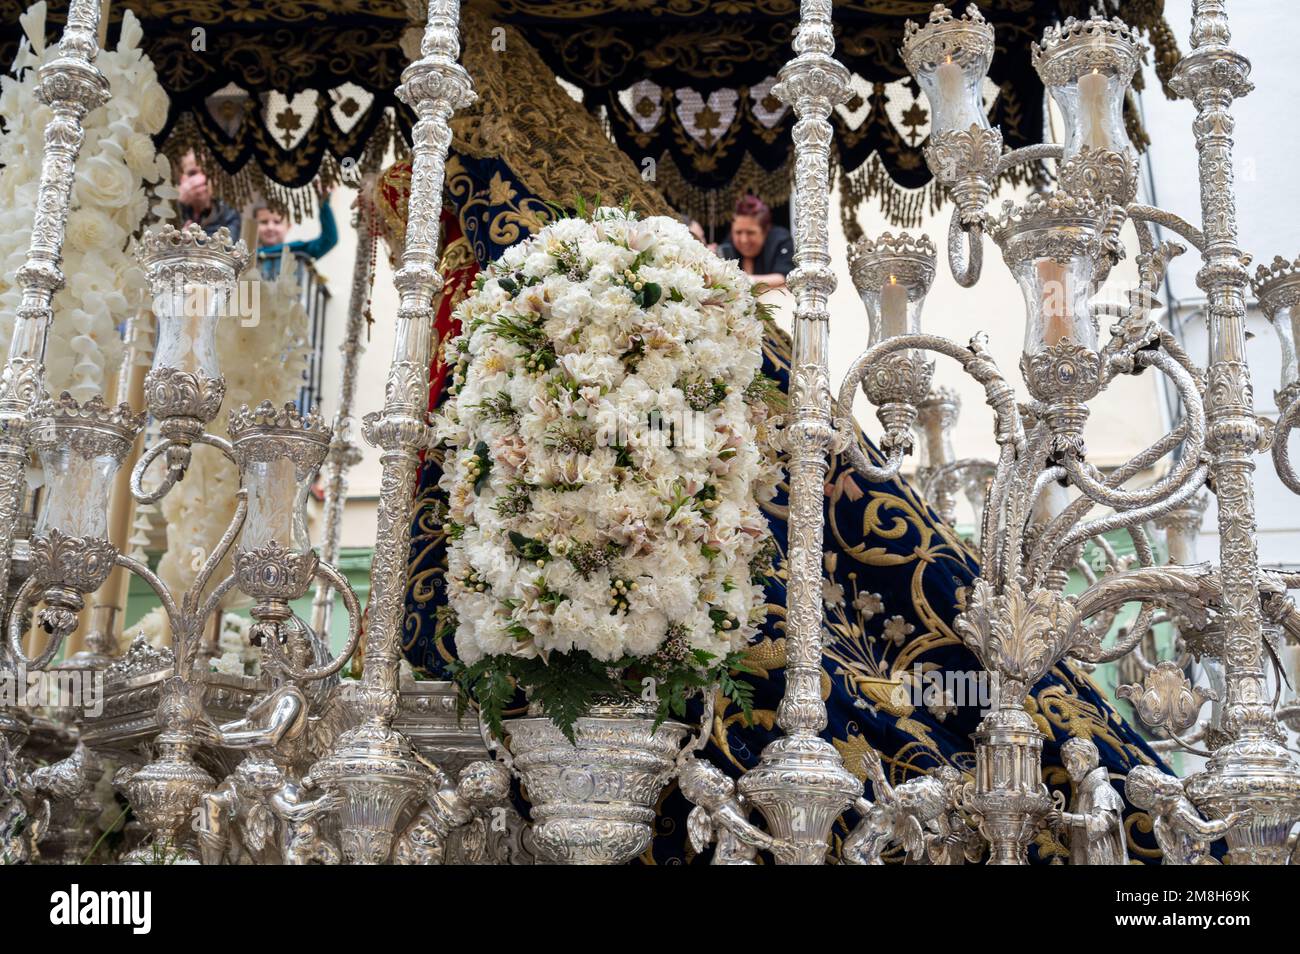 Detail of a throne carrying an effigy of Madonna in an Easter Parade during Holy Week or Semana Santa in Cadiz, Spain Stock Photo